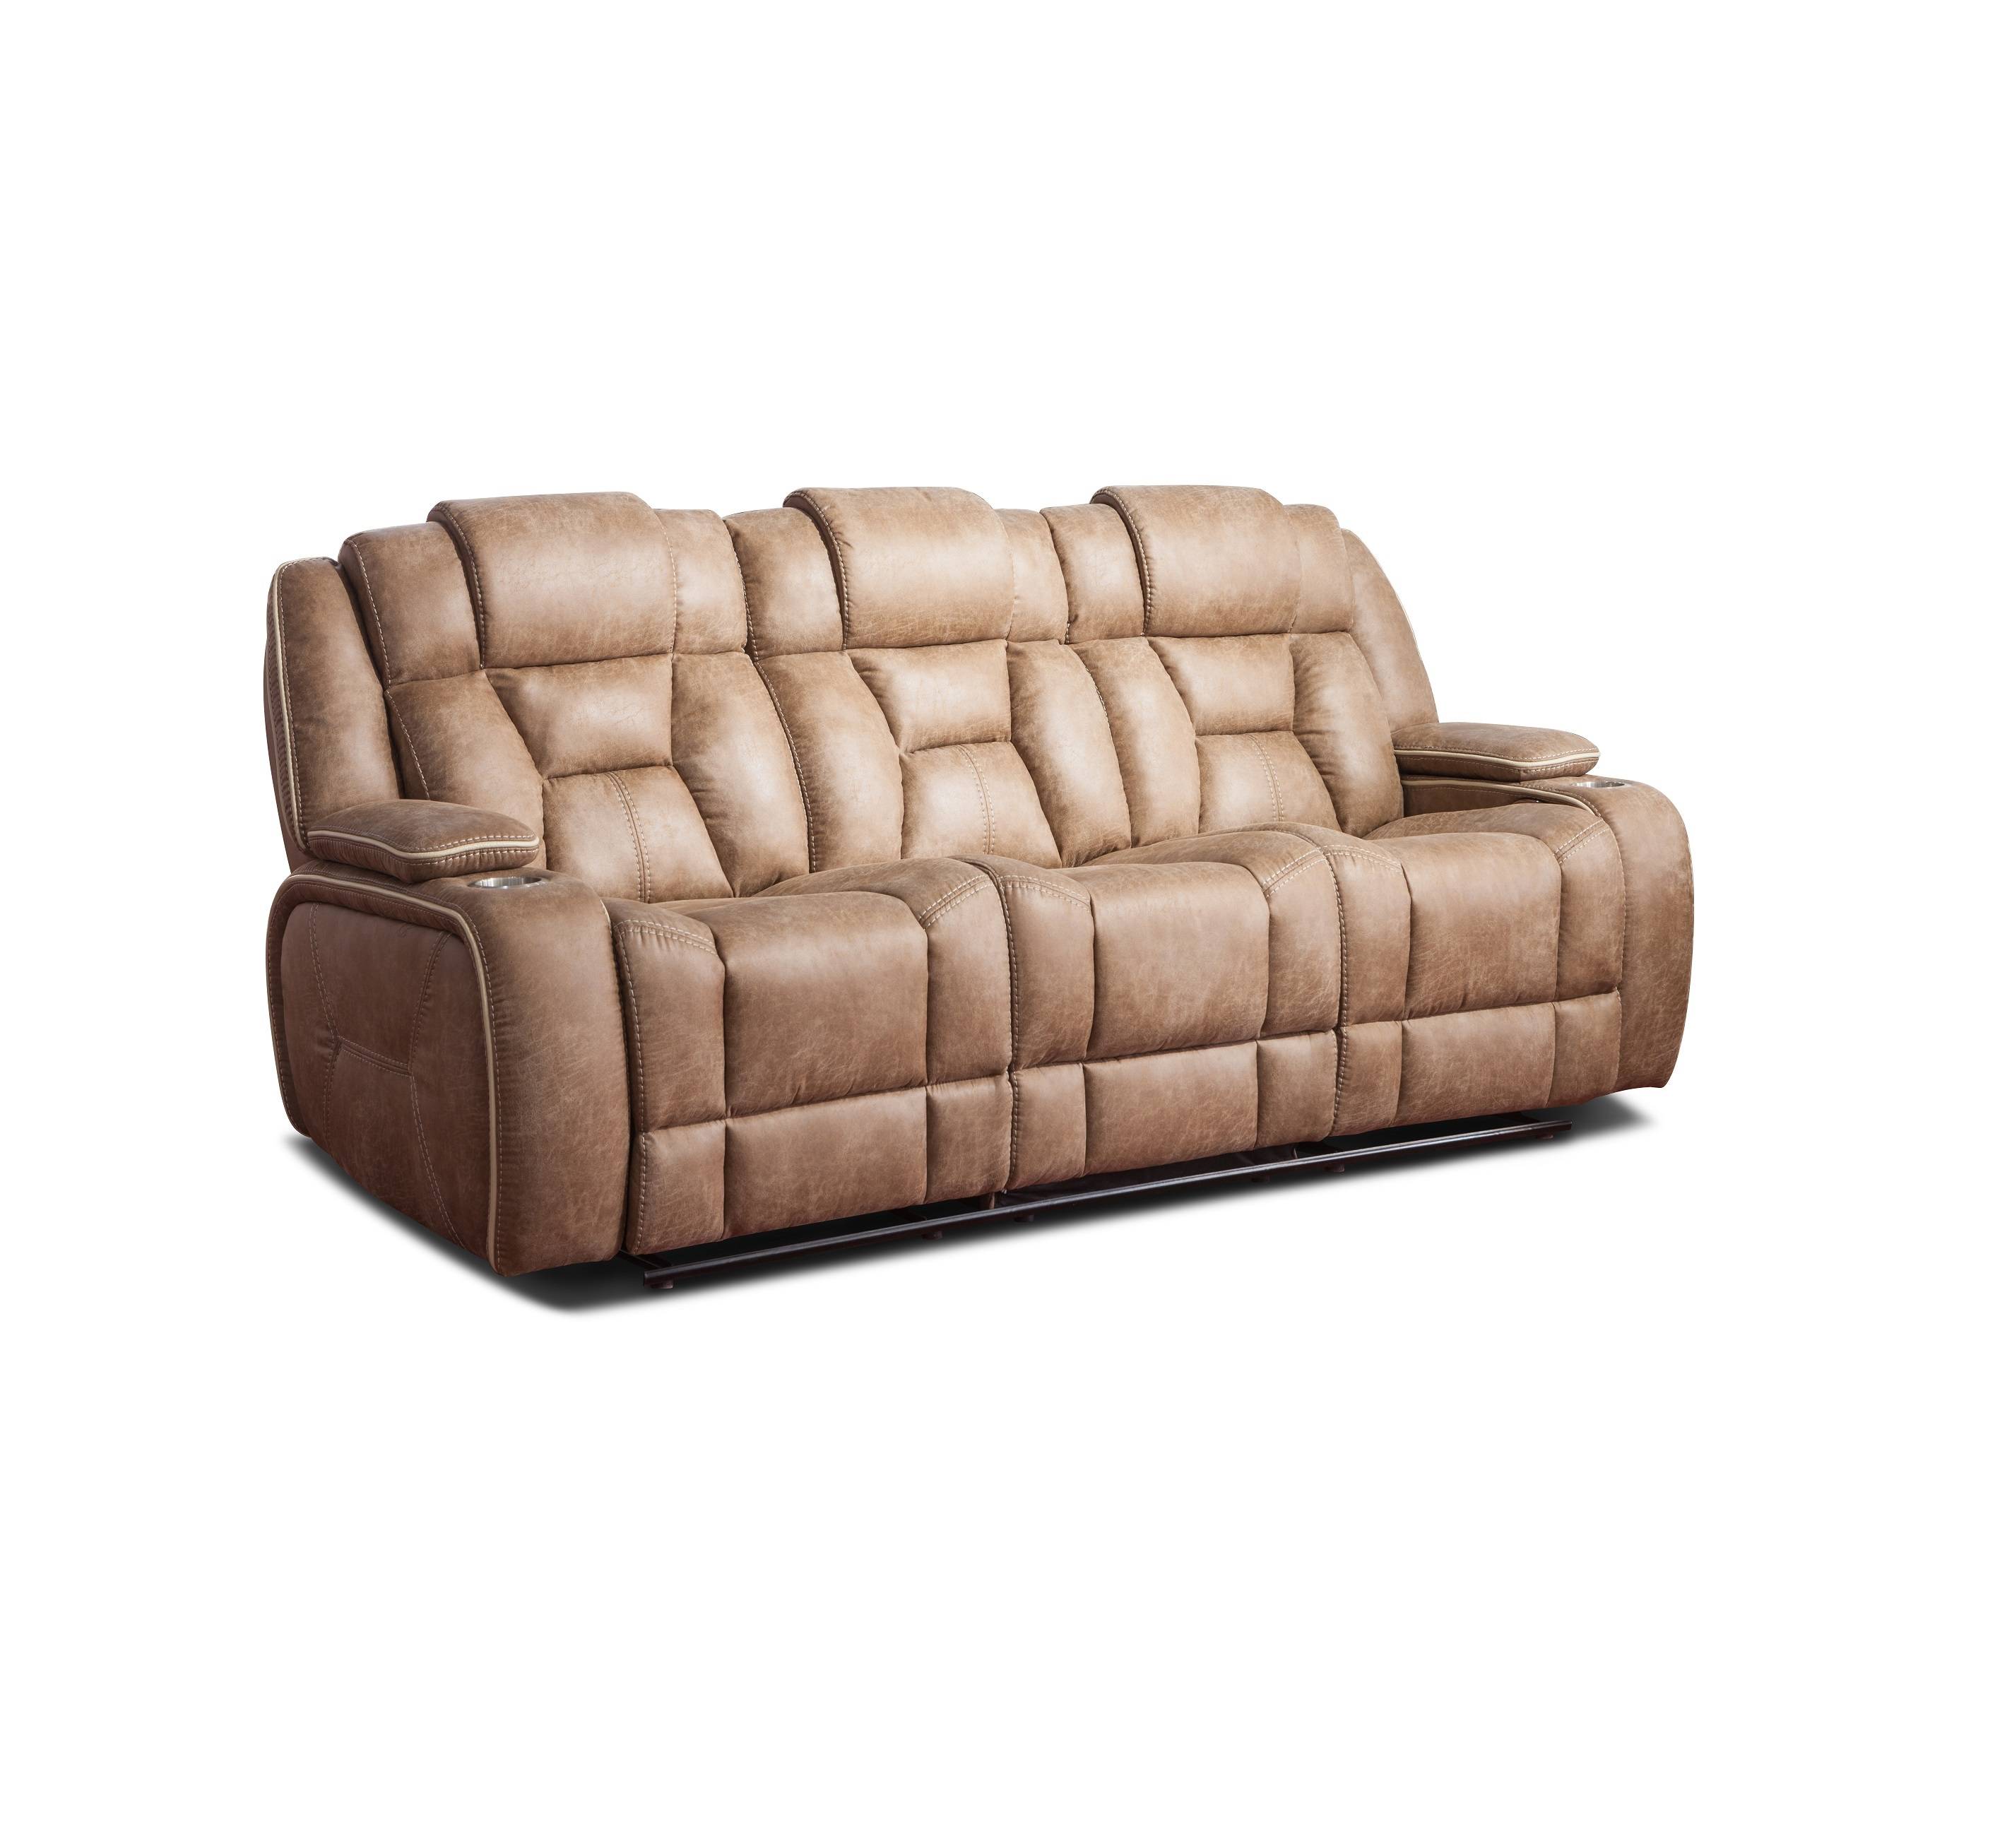 Fancy leather 3+2+1 rocker recliner sofa with cup holder